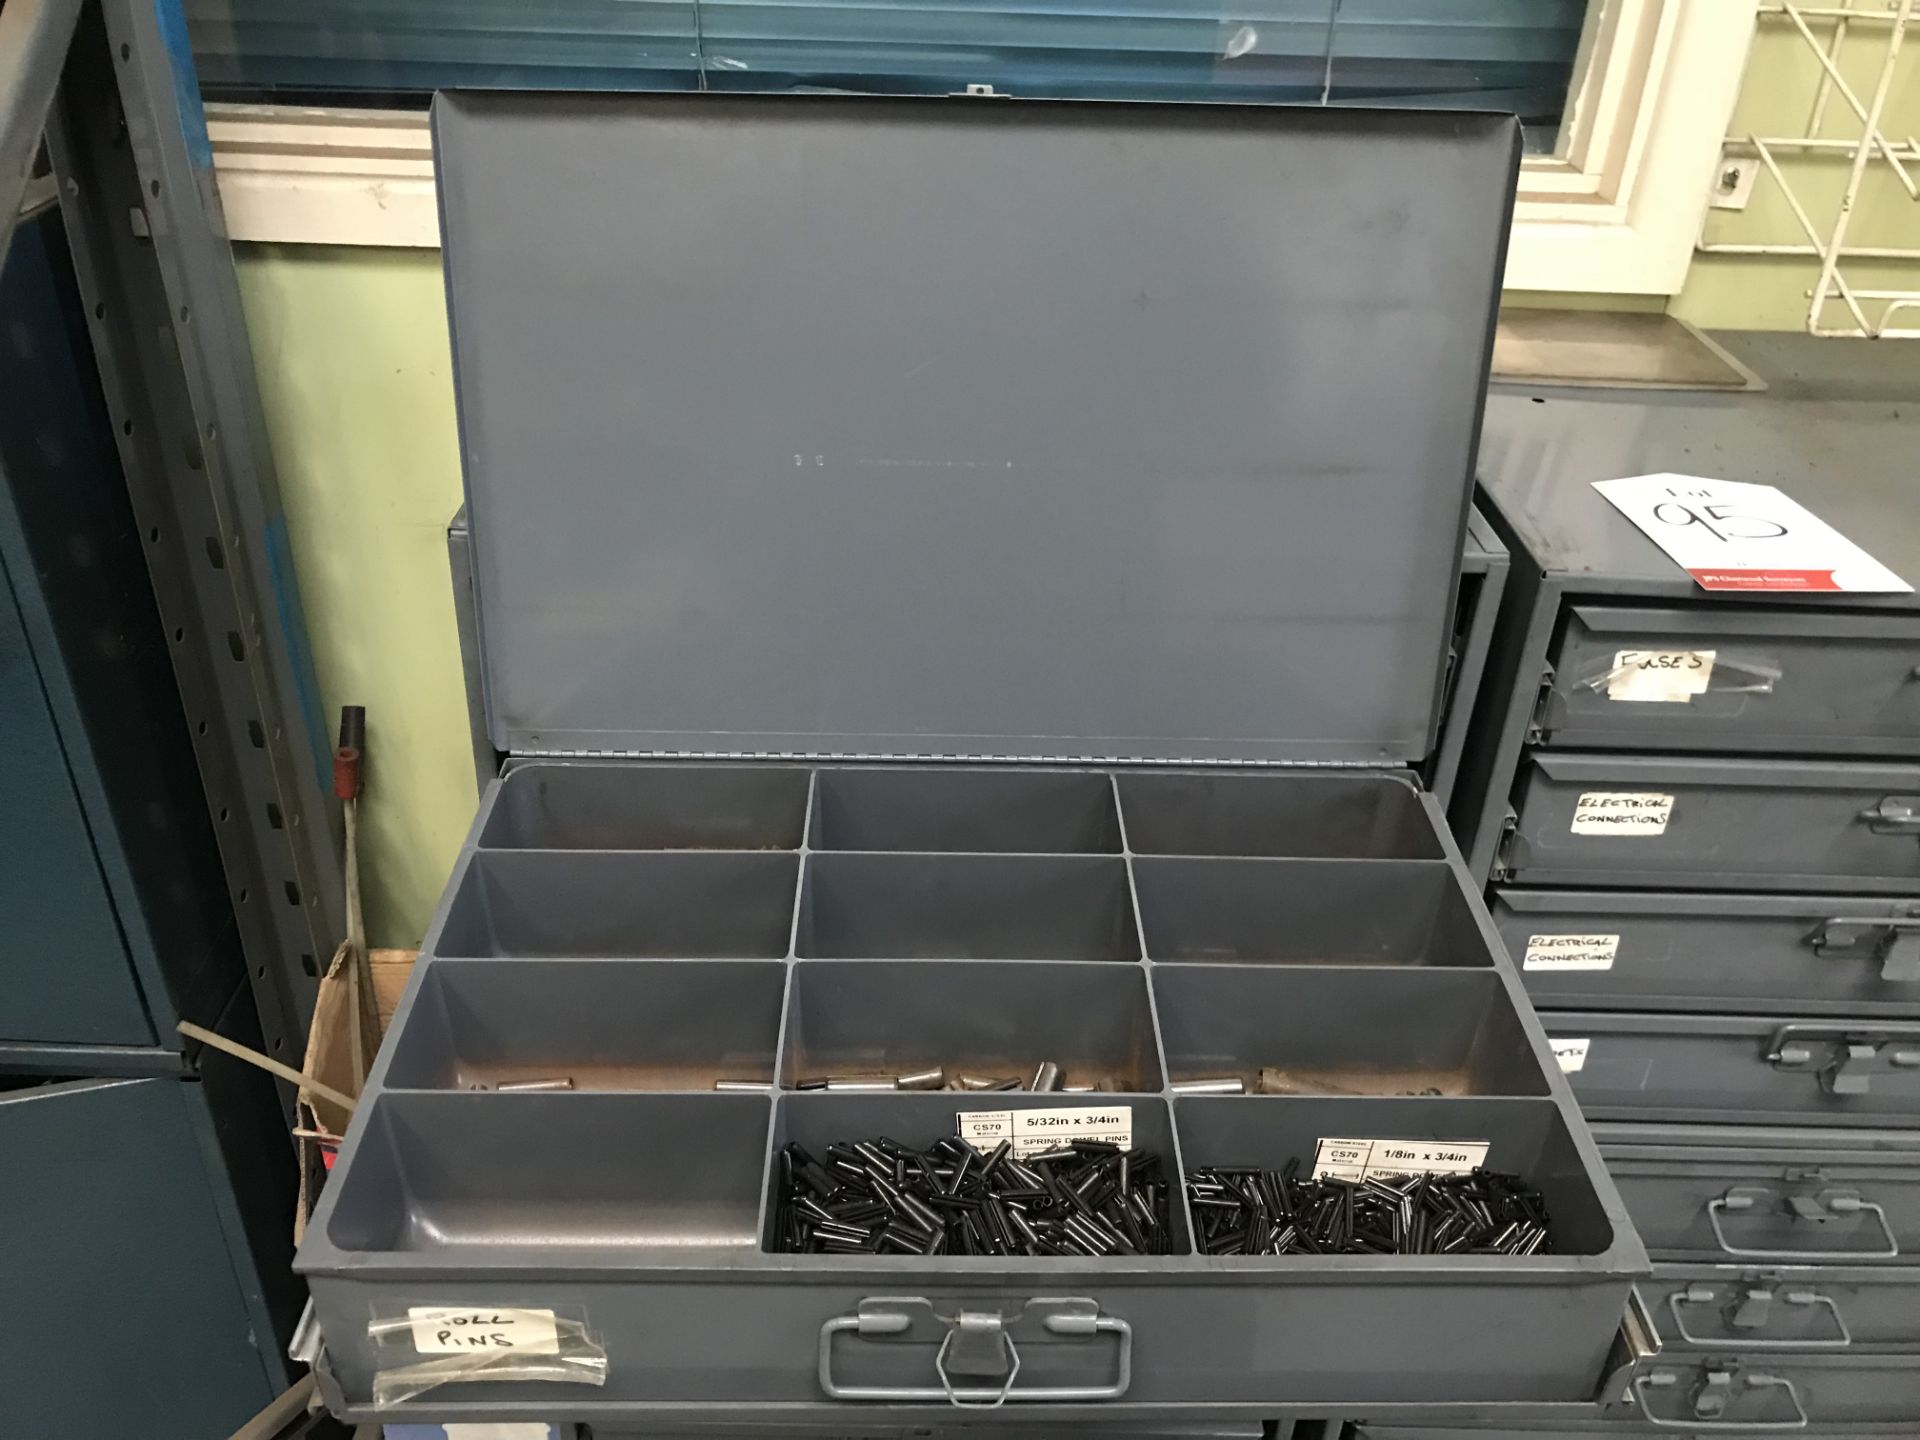 2 x 8 Drawer Workshop Storage Unit w/ Contents of Fixings - Image 2 of 2